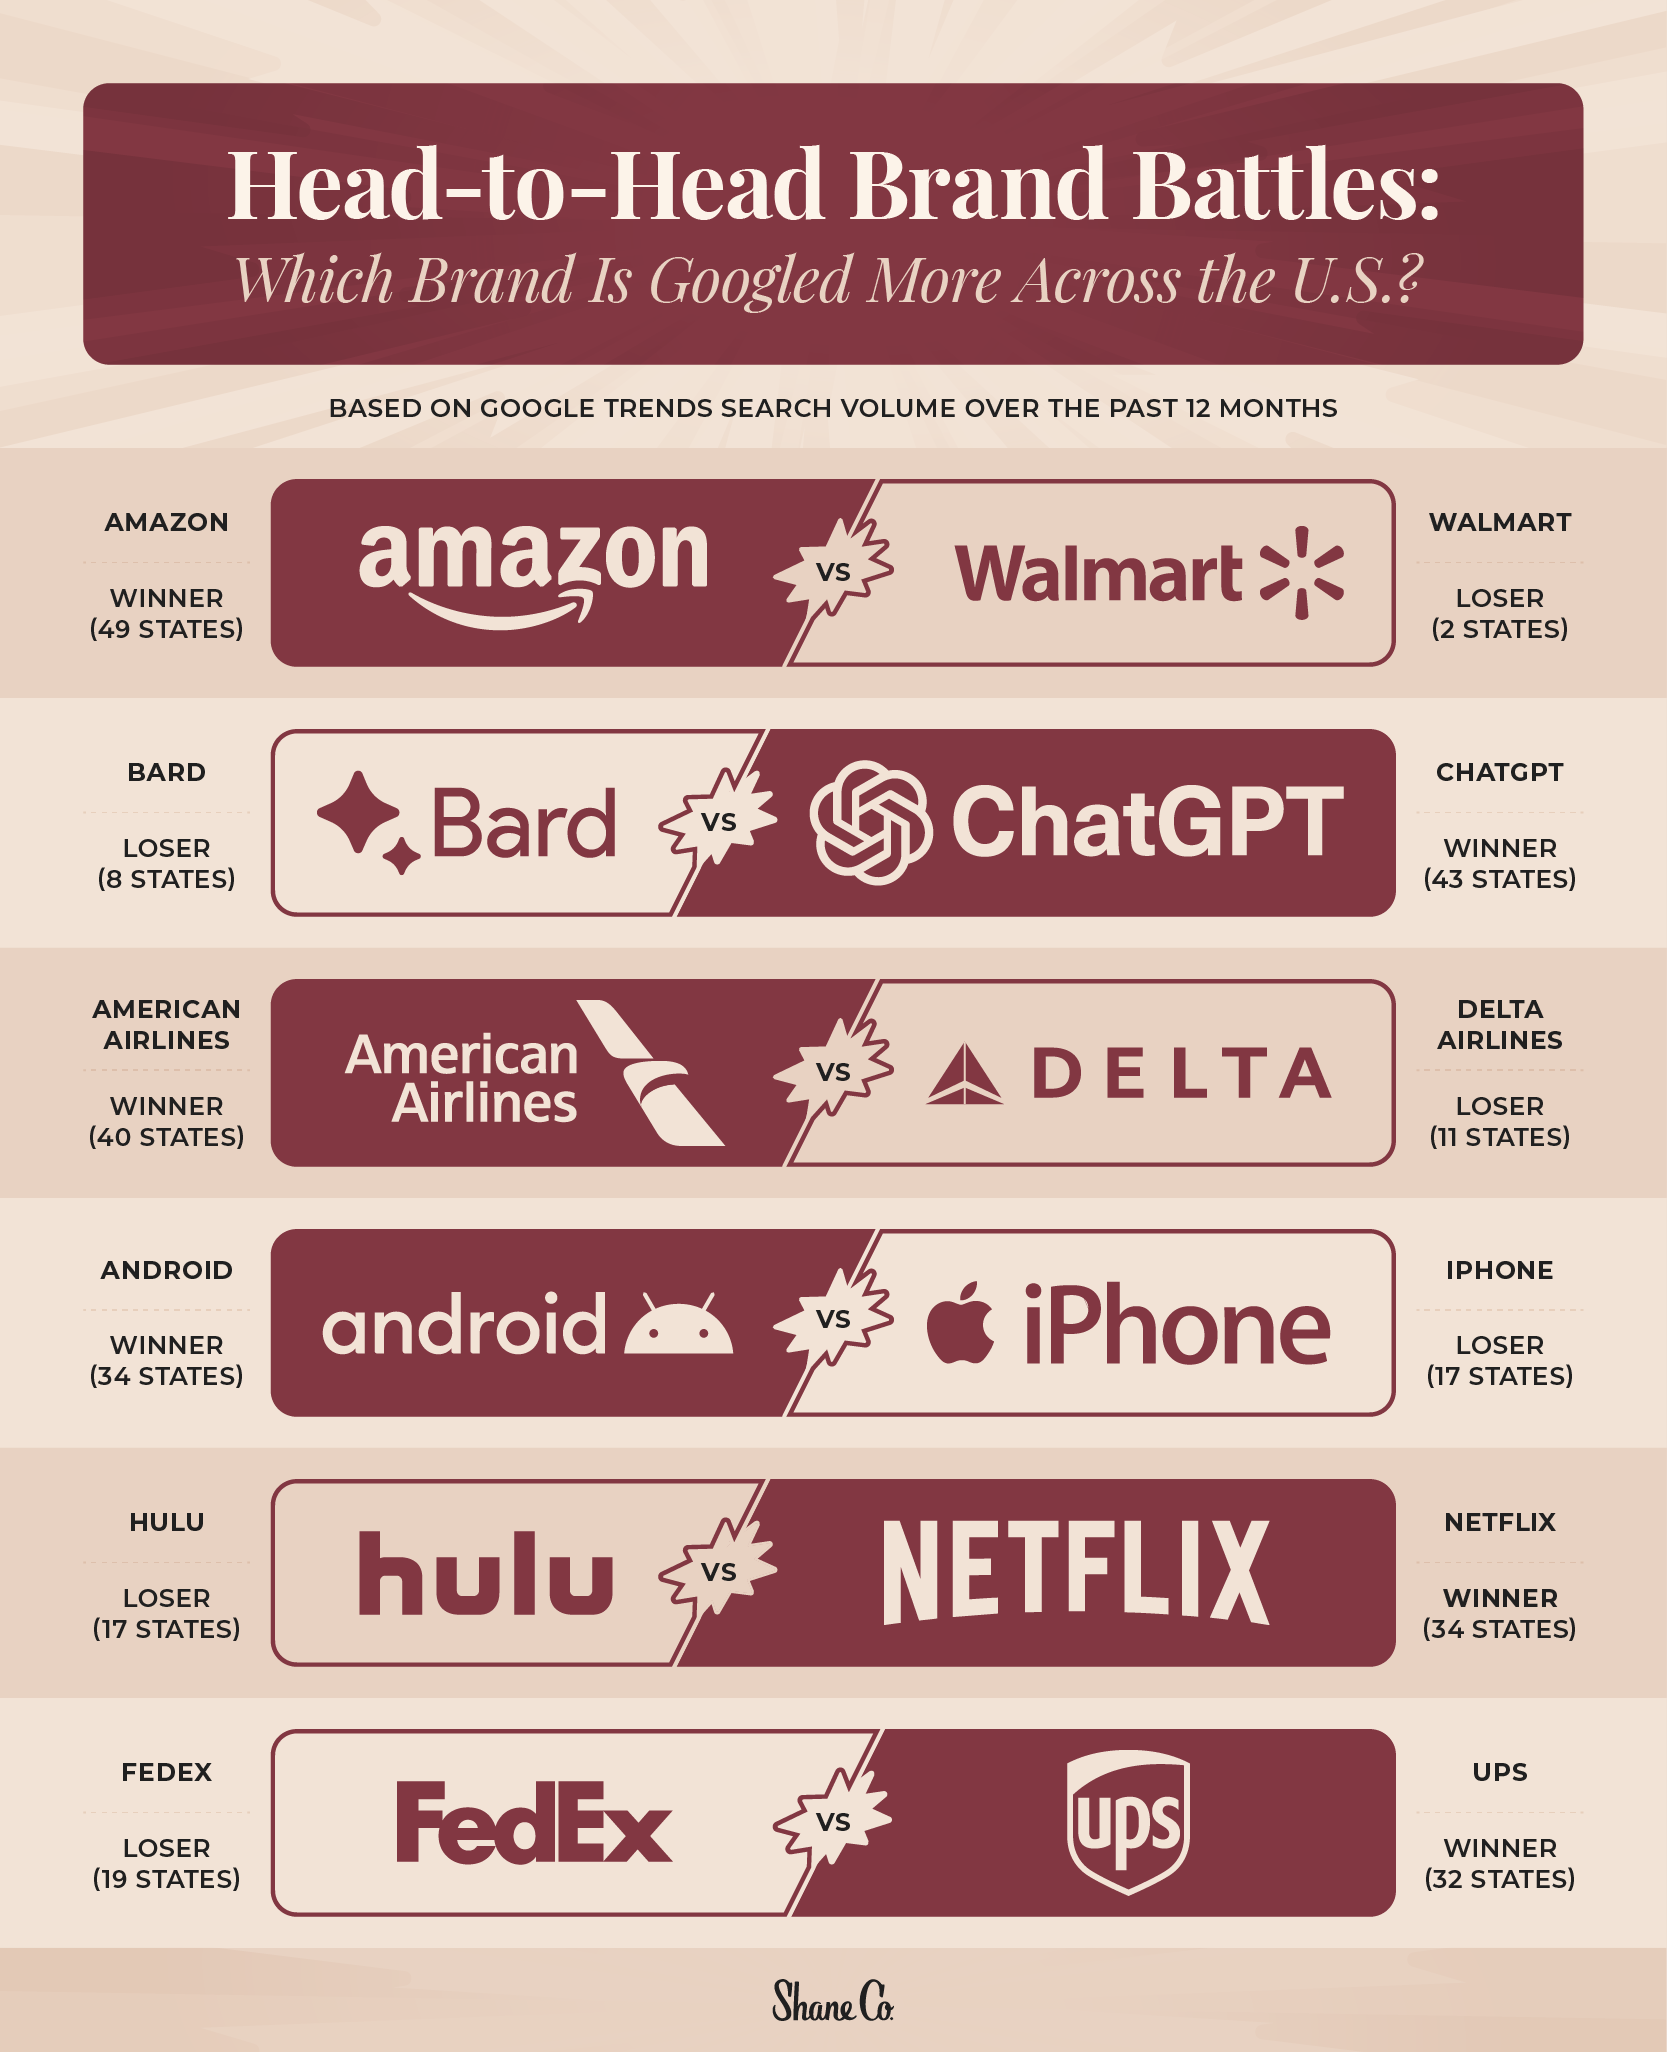 infographic displaying the results of top brand rivalries across the U.S.